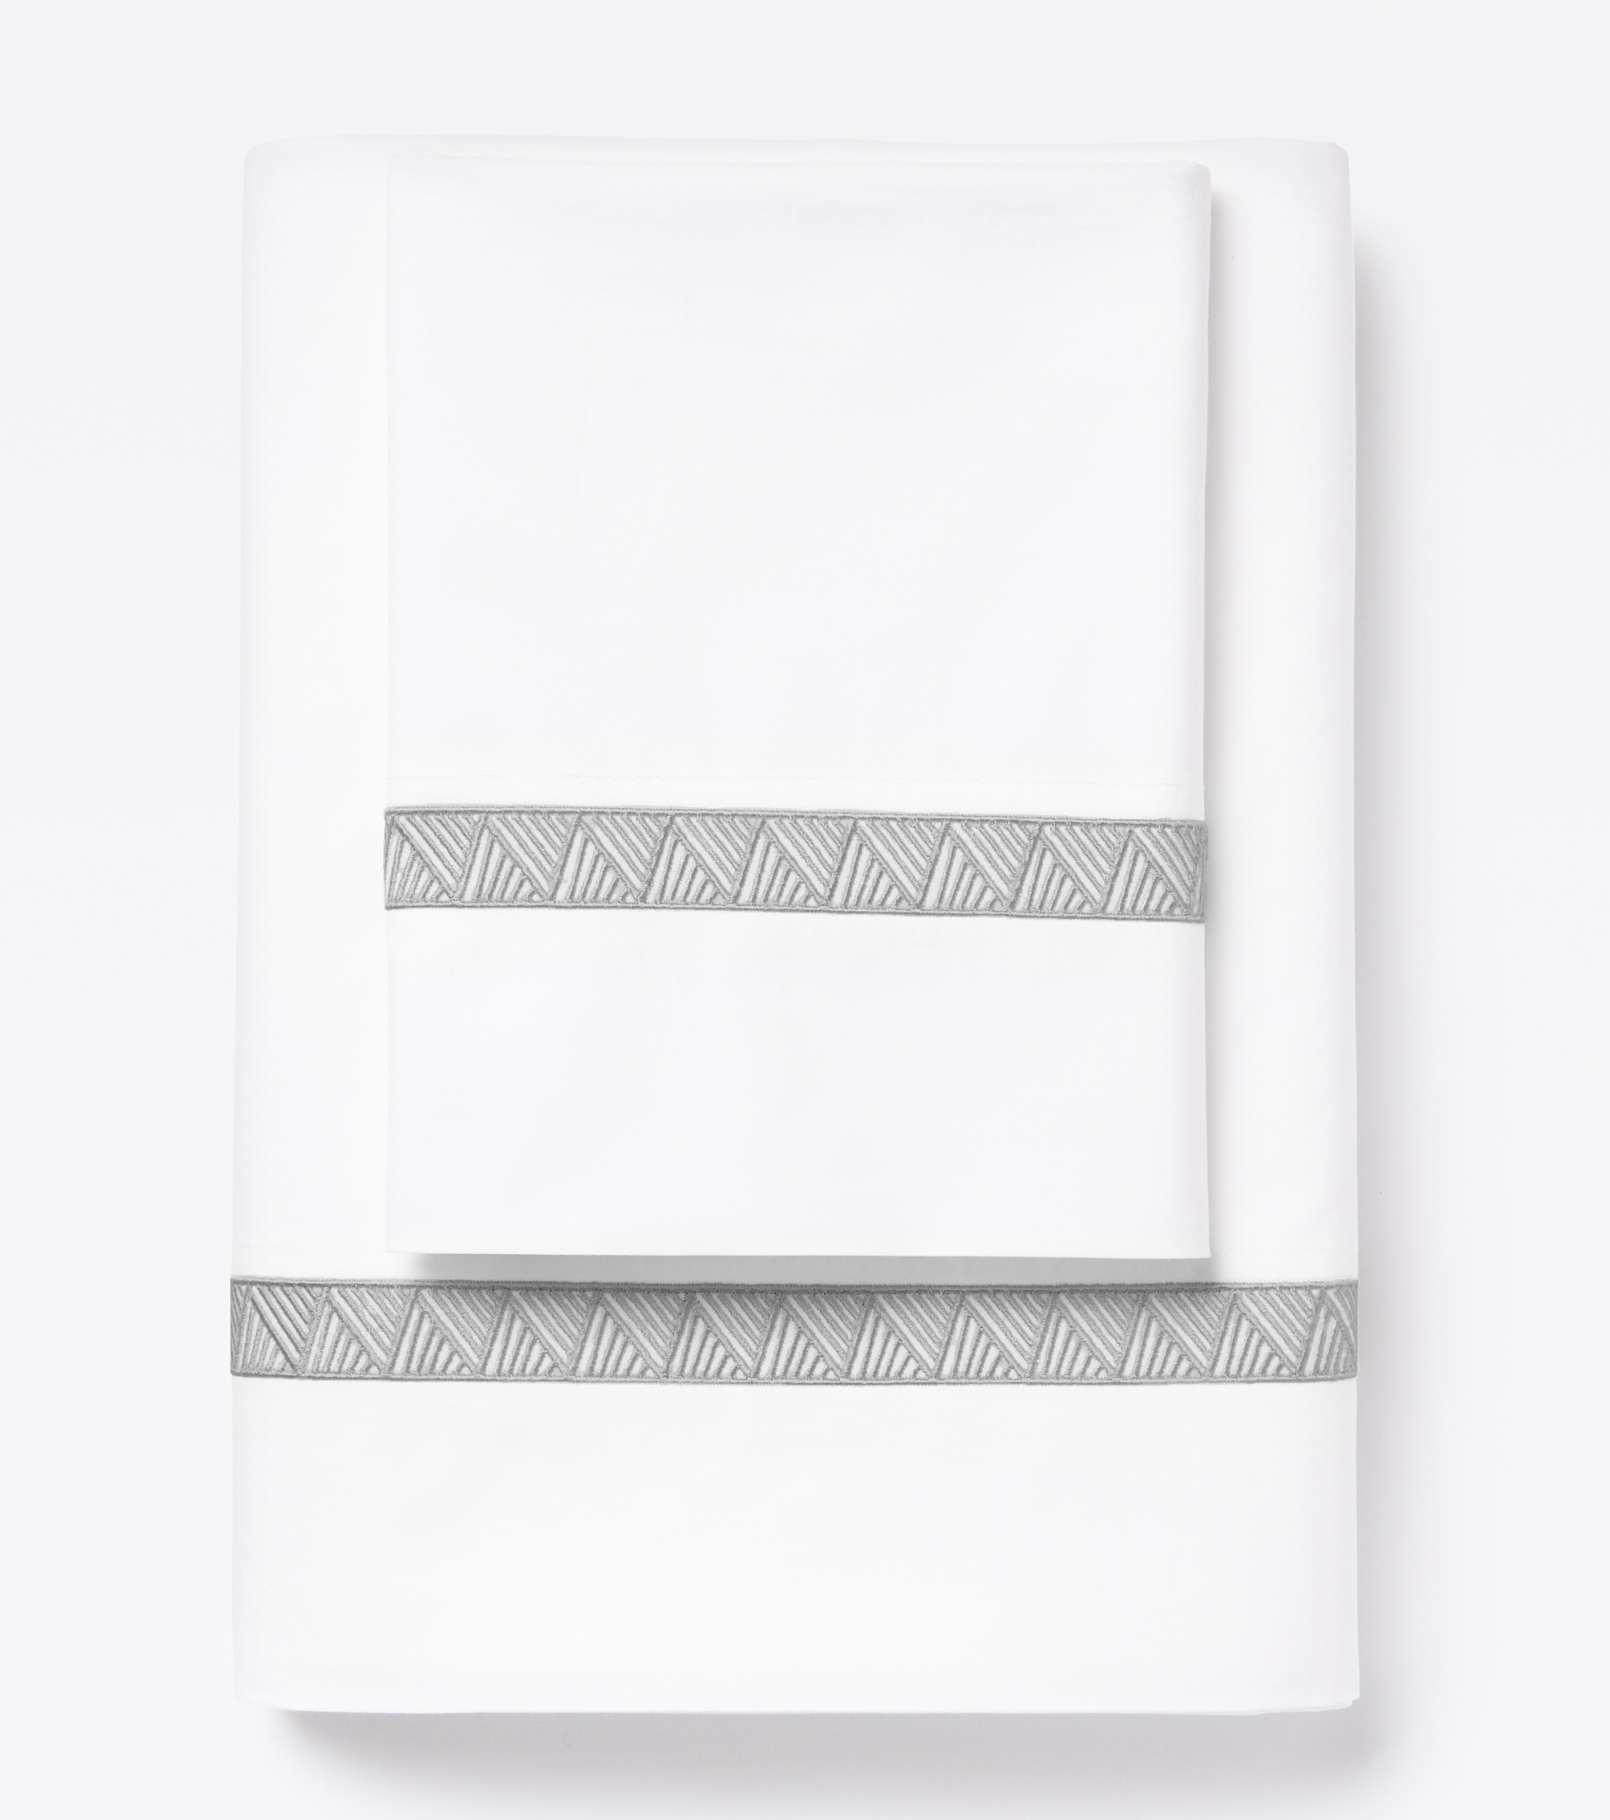 Averylily Weave Sheet Set in White with embroidered details in Stone. 510-thread cotton pure cotton percale.